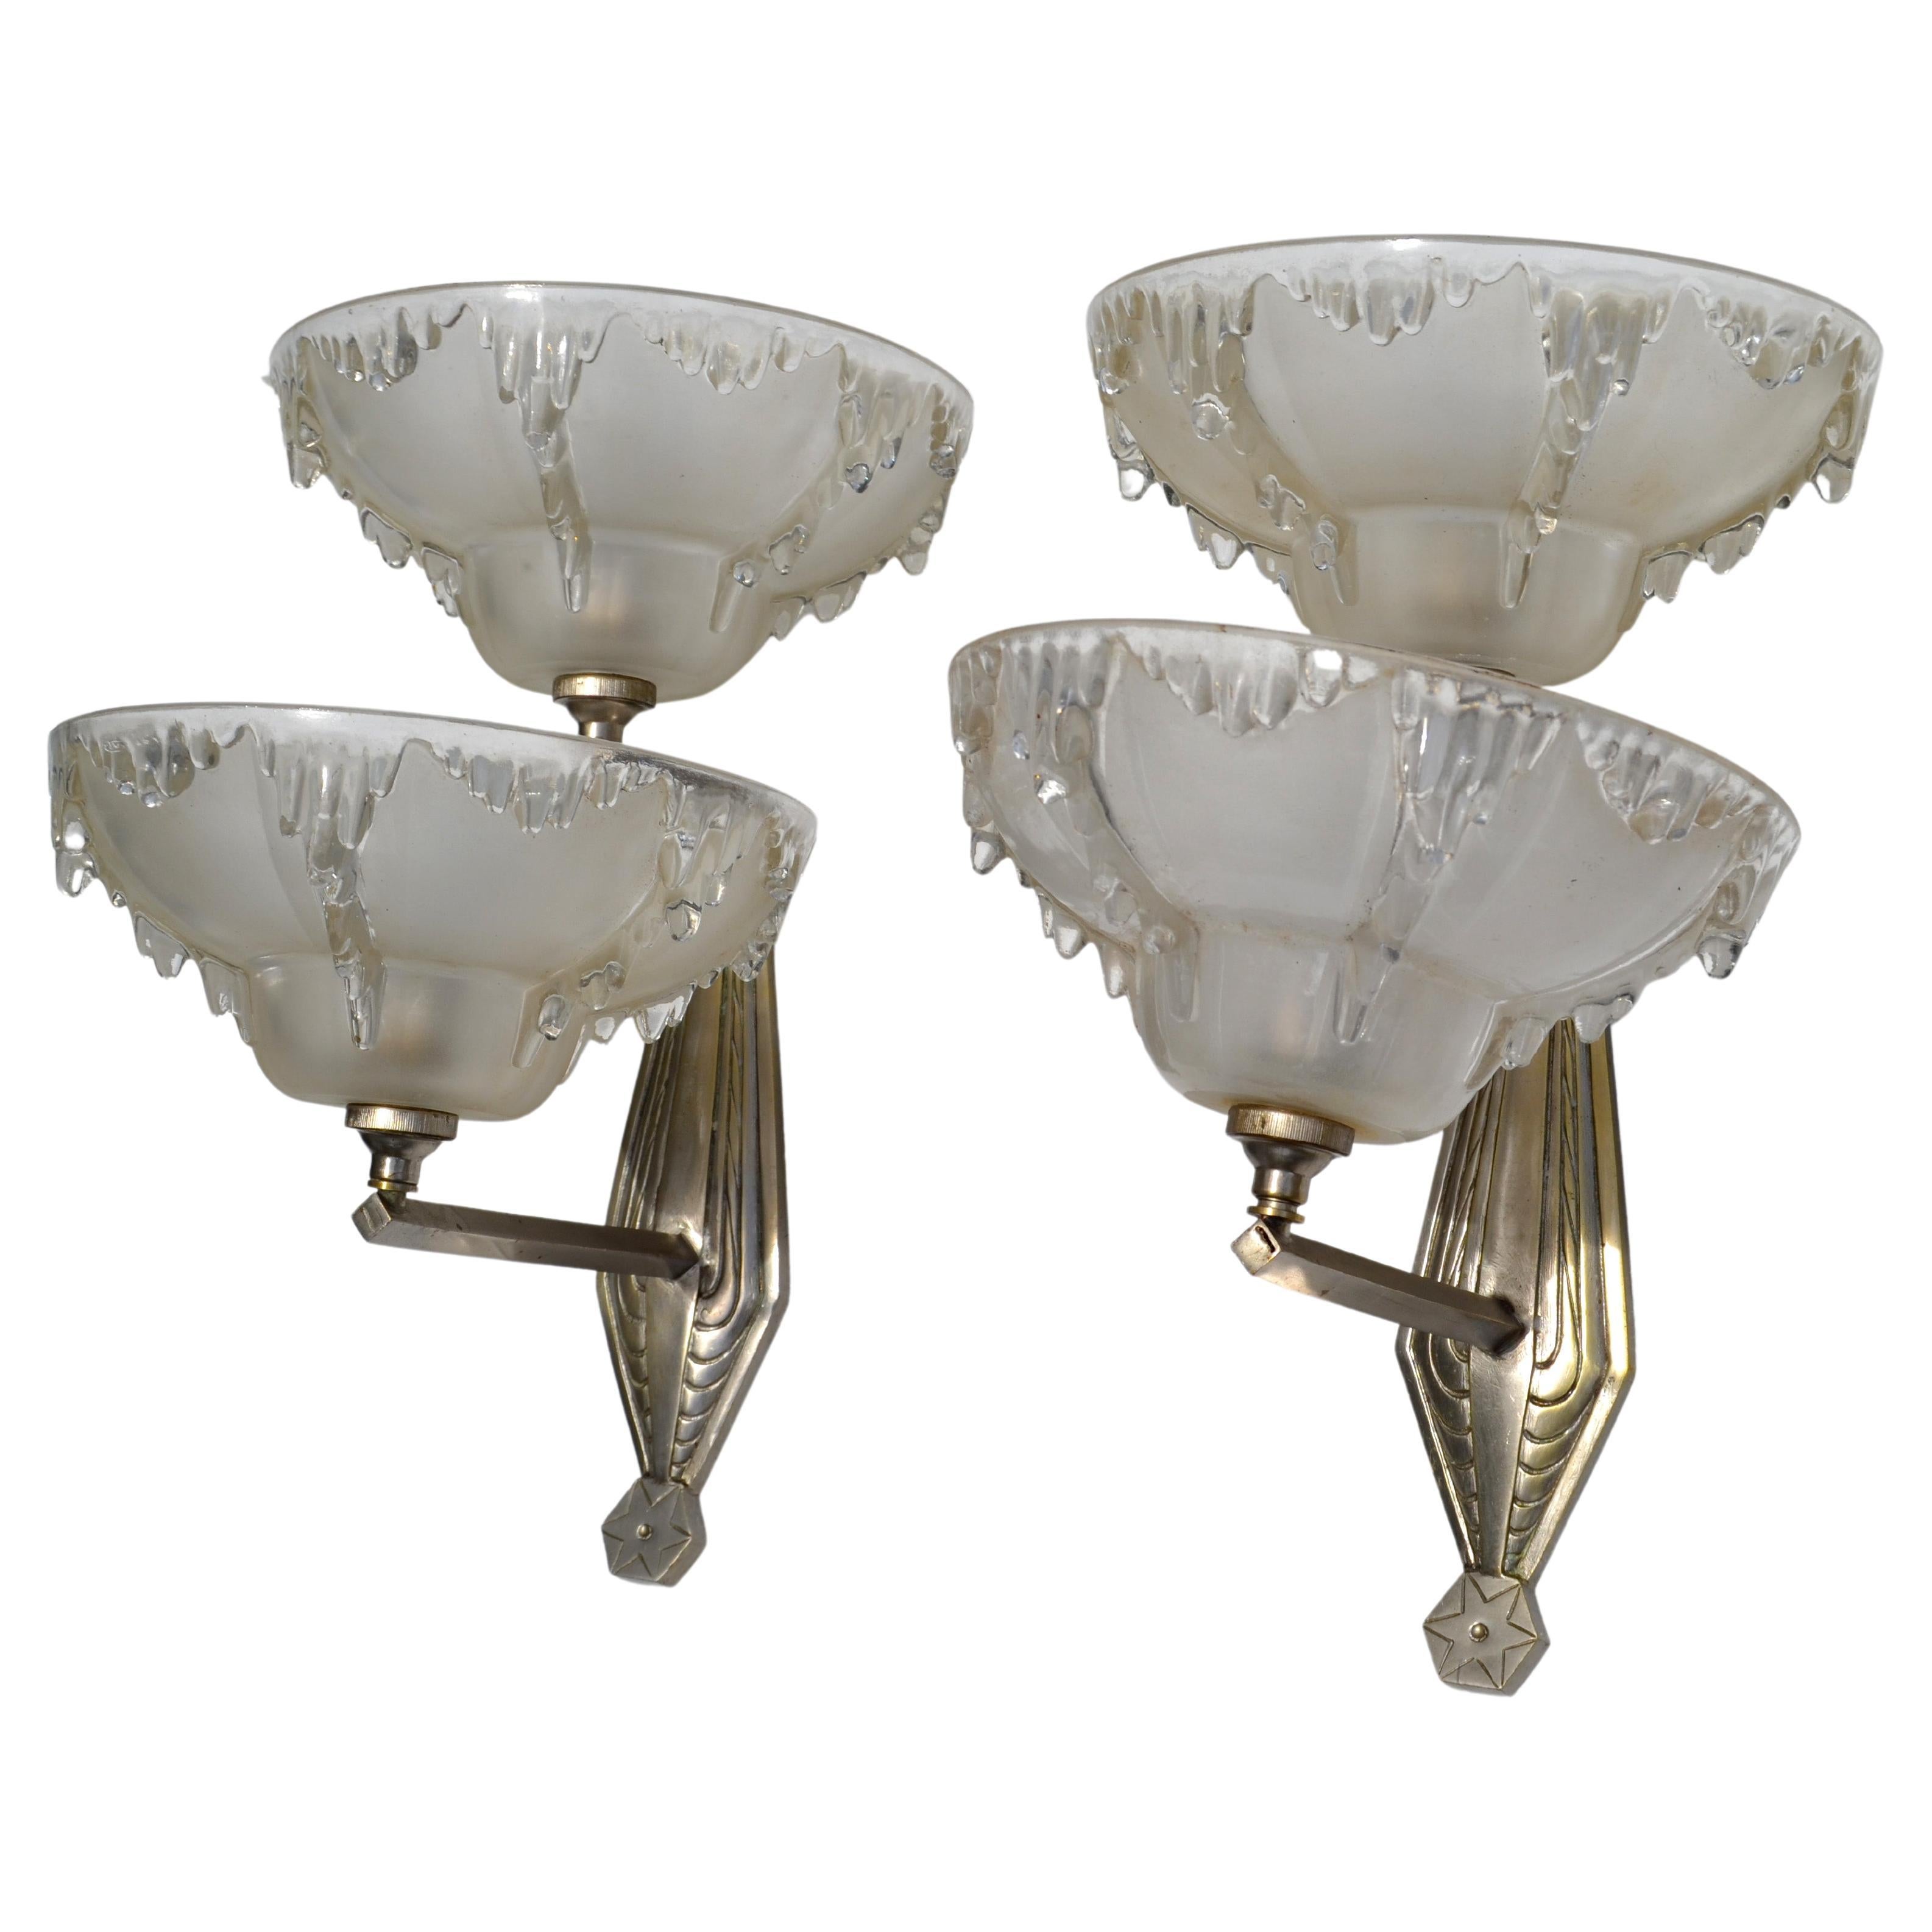 French Art Deco Blown Murano Glass & Steel Wall Sconces France Mid-Century Modern, Pair For Sale